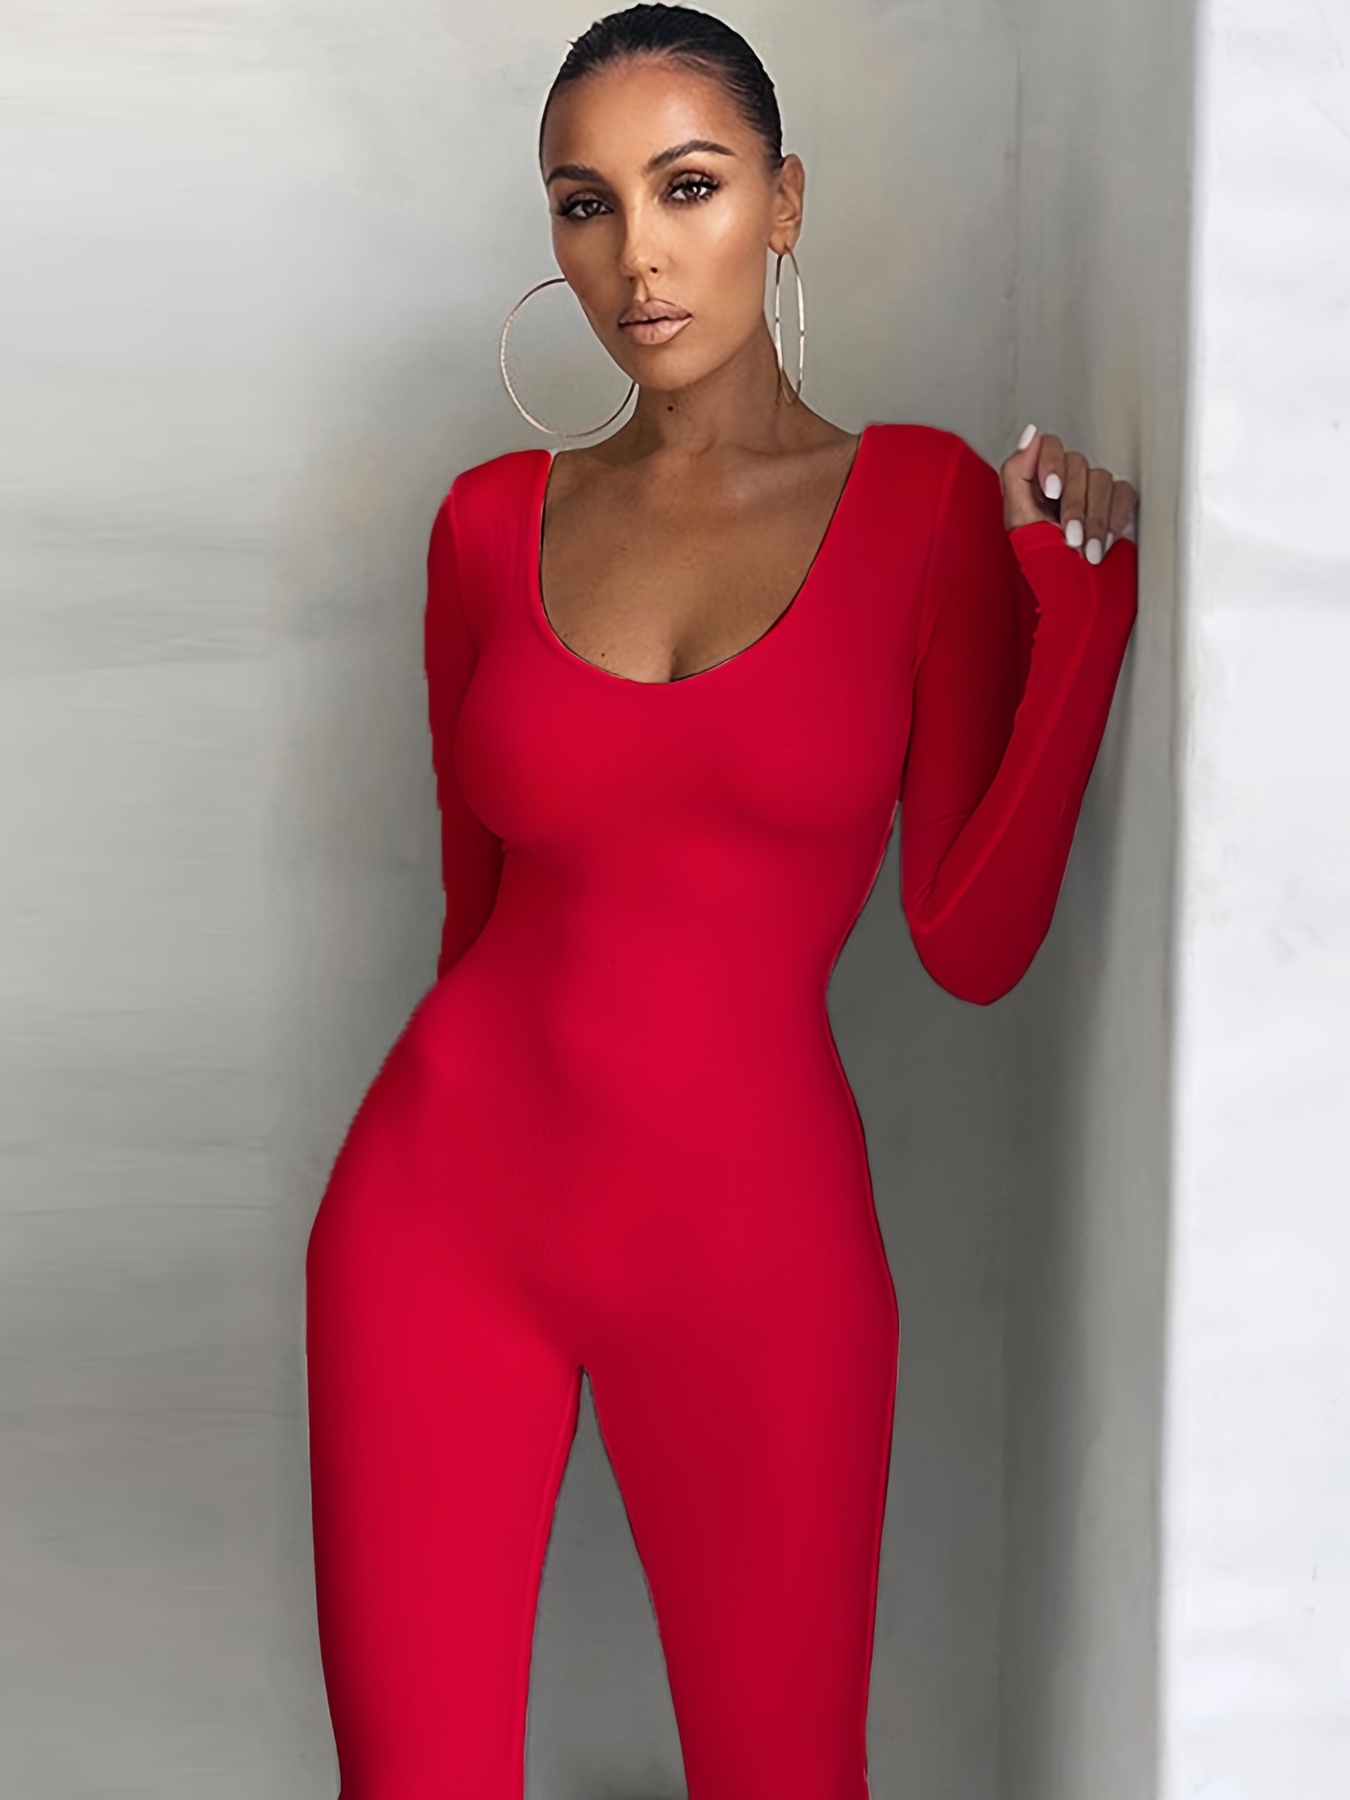 Grey And Black Long Sleeve Bodycon Seamless Jumpsuit For Women Elastic,  Skinny, And Sexy Summer Rompers From Yurongf, $17.89